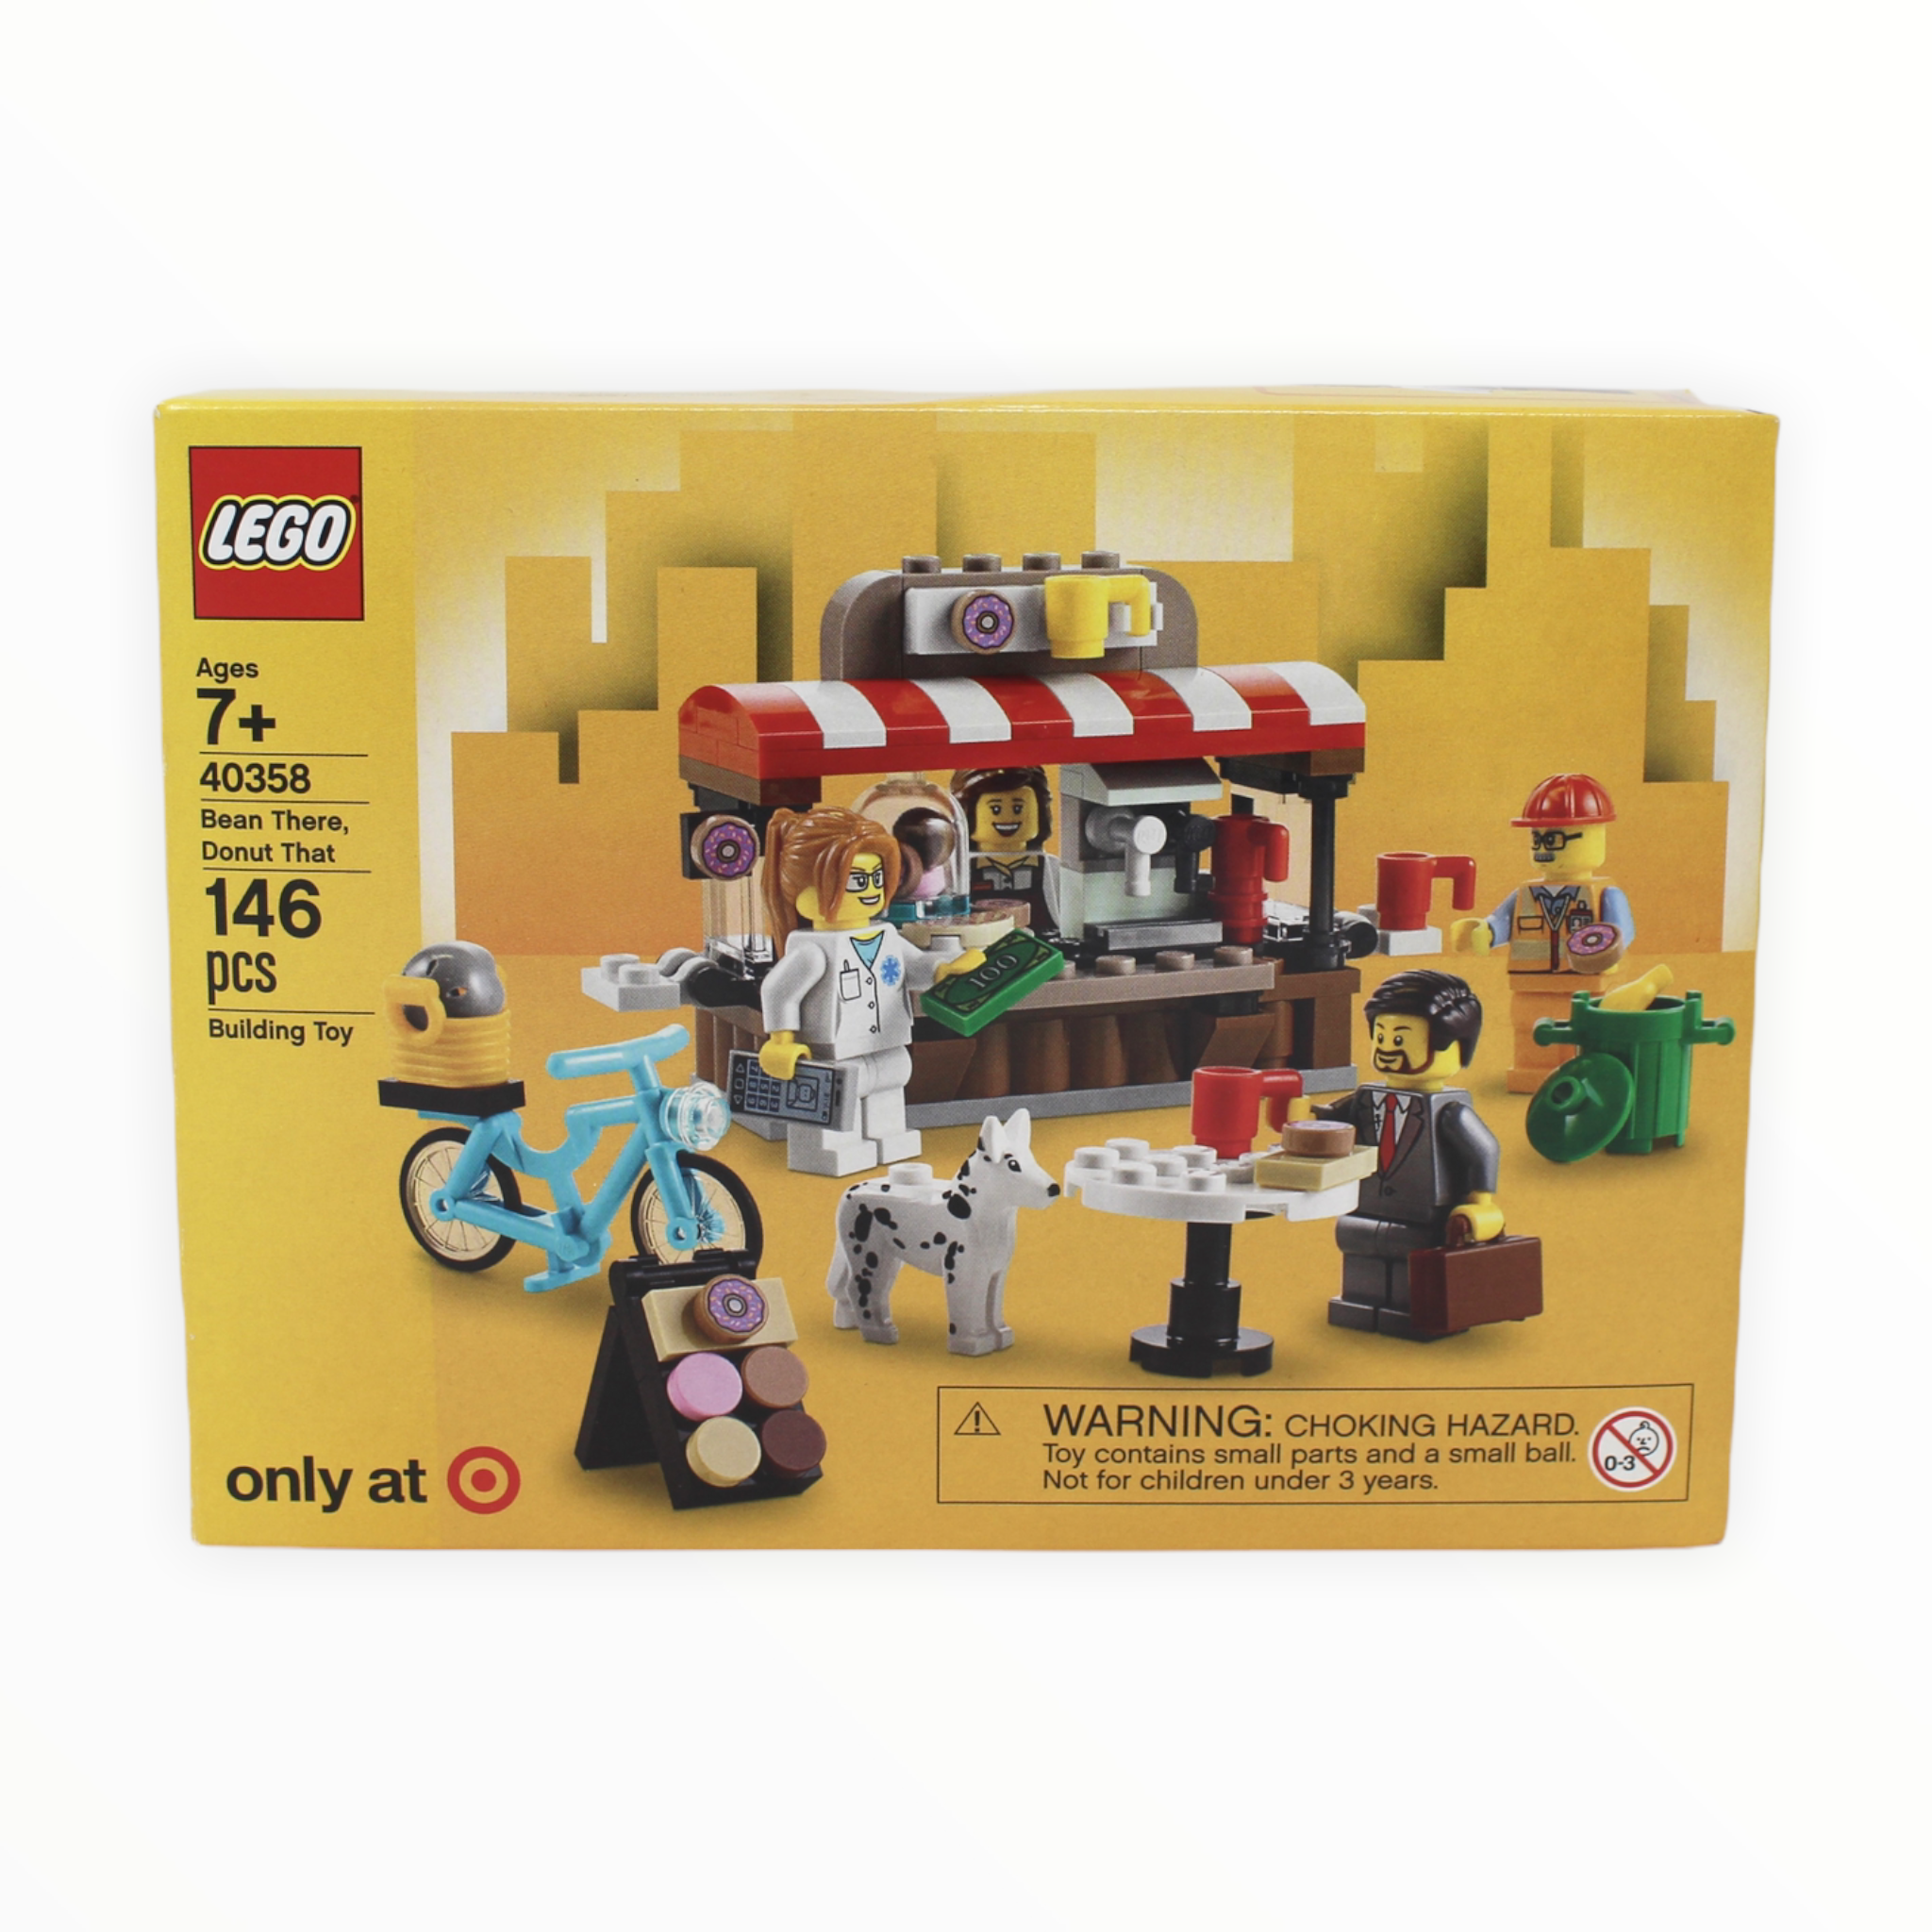 Certified Used Set 40358 LEGO Bean There, Donut That